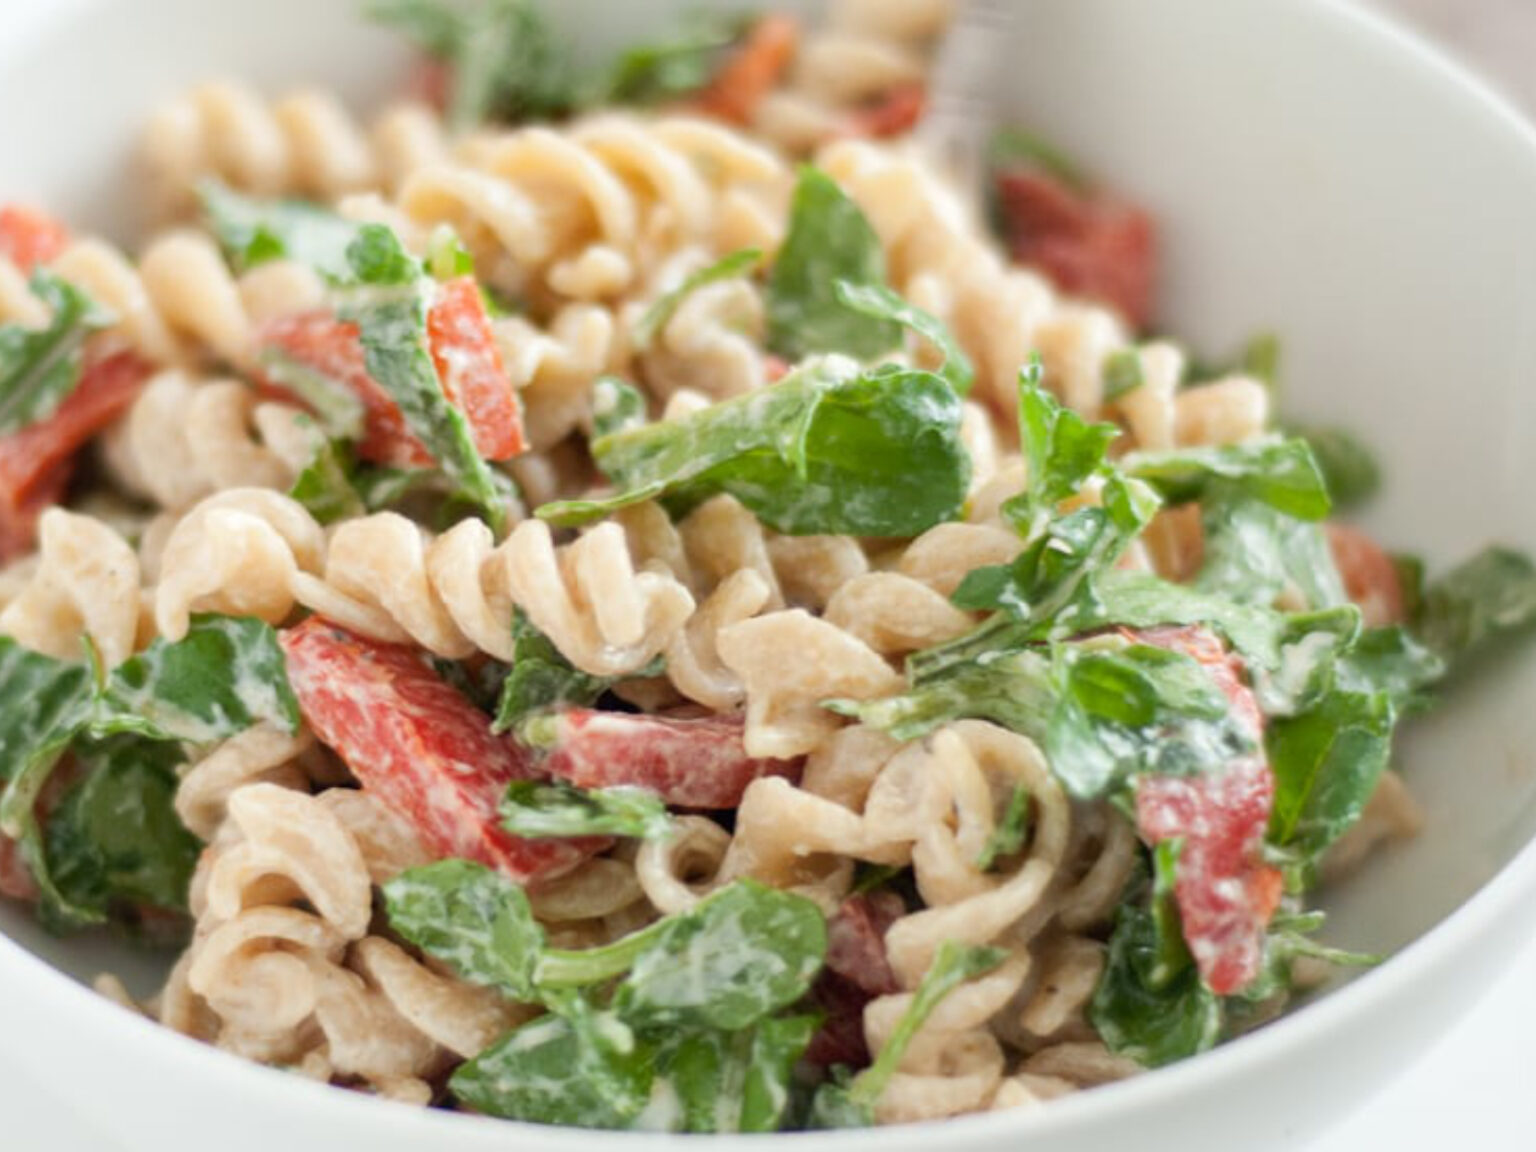 8 Healthy Pasta Salad Recipes We’re Absolutely Loving